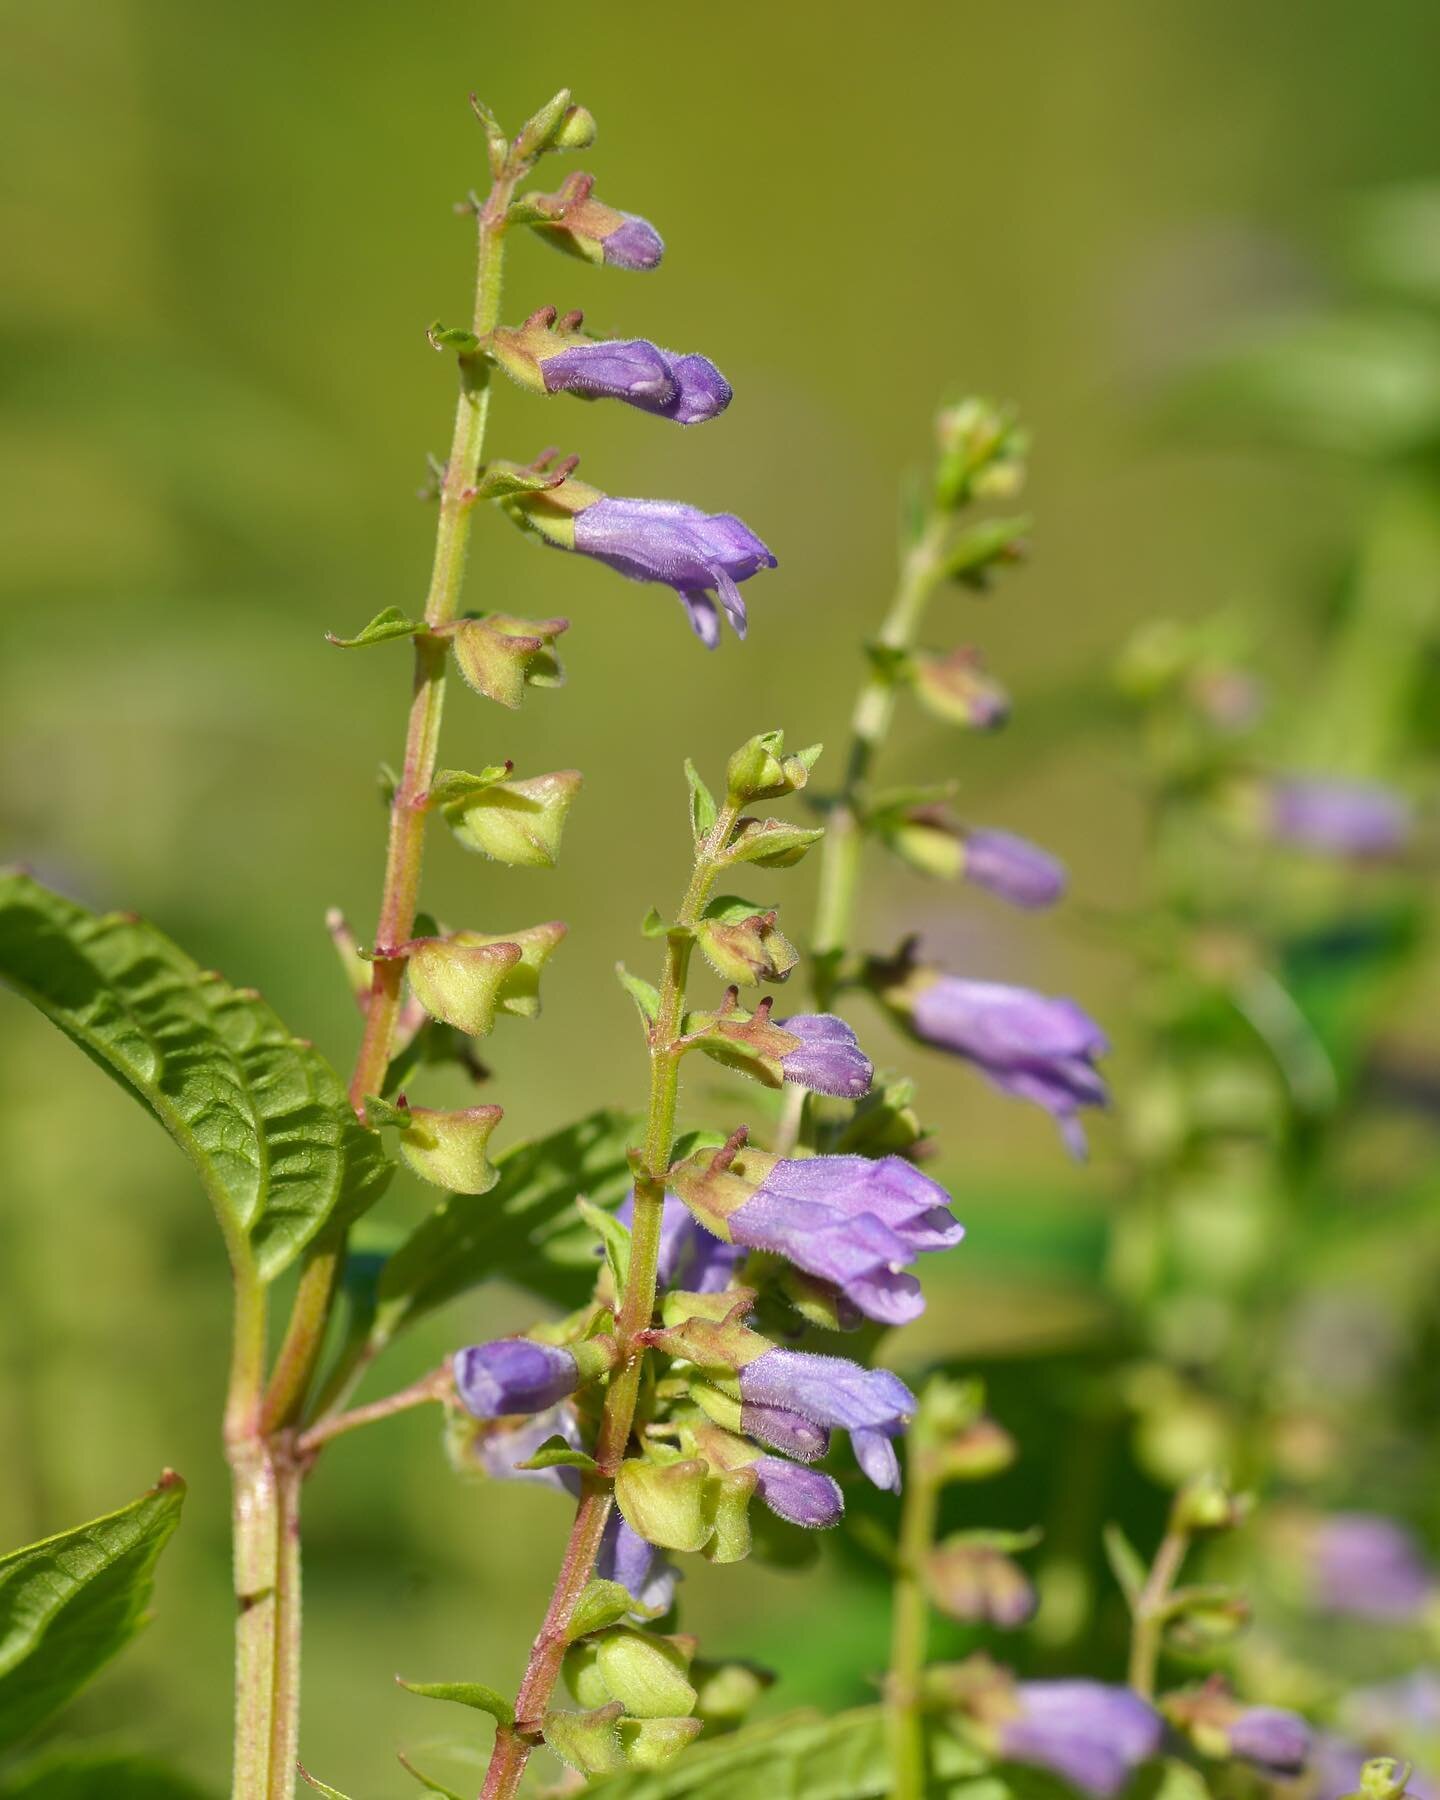 For sale this spring online and at our garden center: Skullcap is a low growing herbaceous native perennial in the mint family. Like other members of the mint family, skullcap is square-stemmed and has opposite leaves, though it doesn't have aromatic